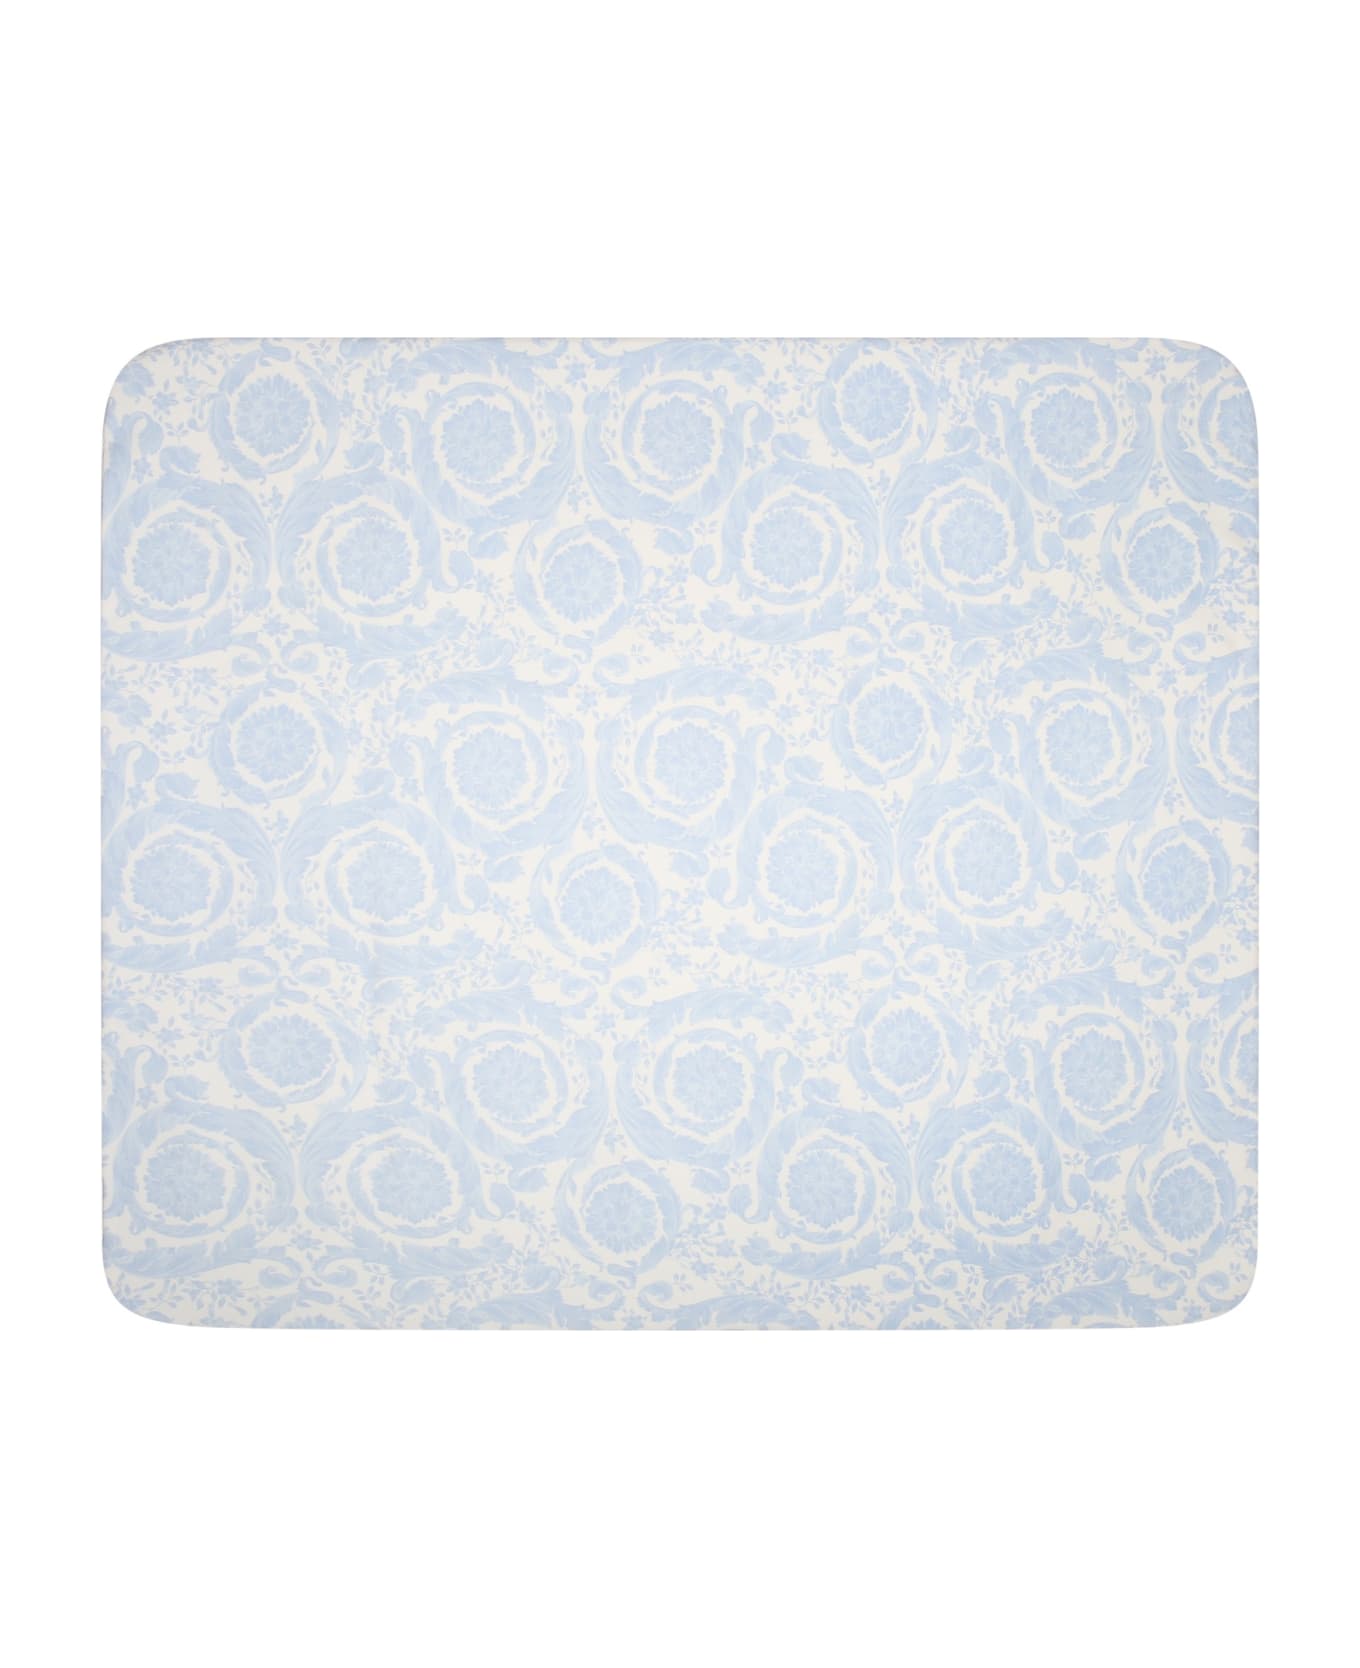 Versace Light Blue Blanket For Baby Boy With Baroque Print - Light Blue